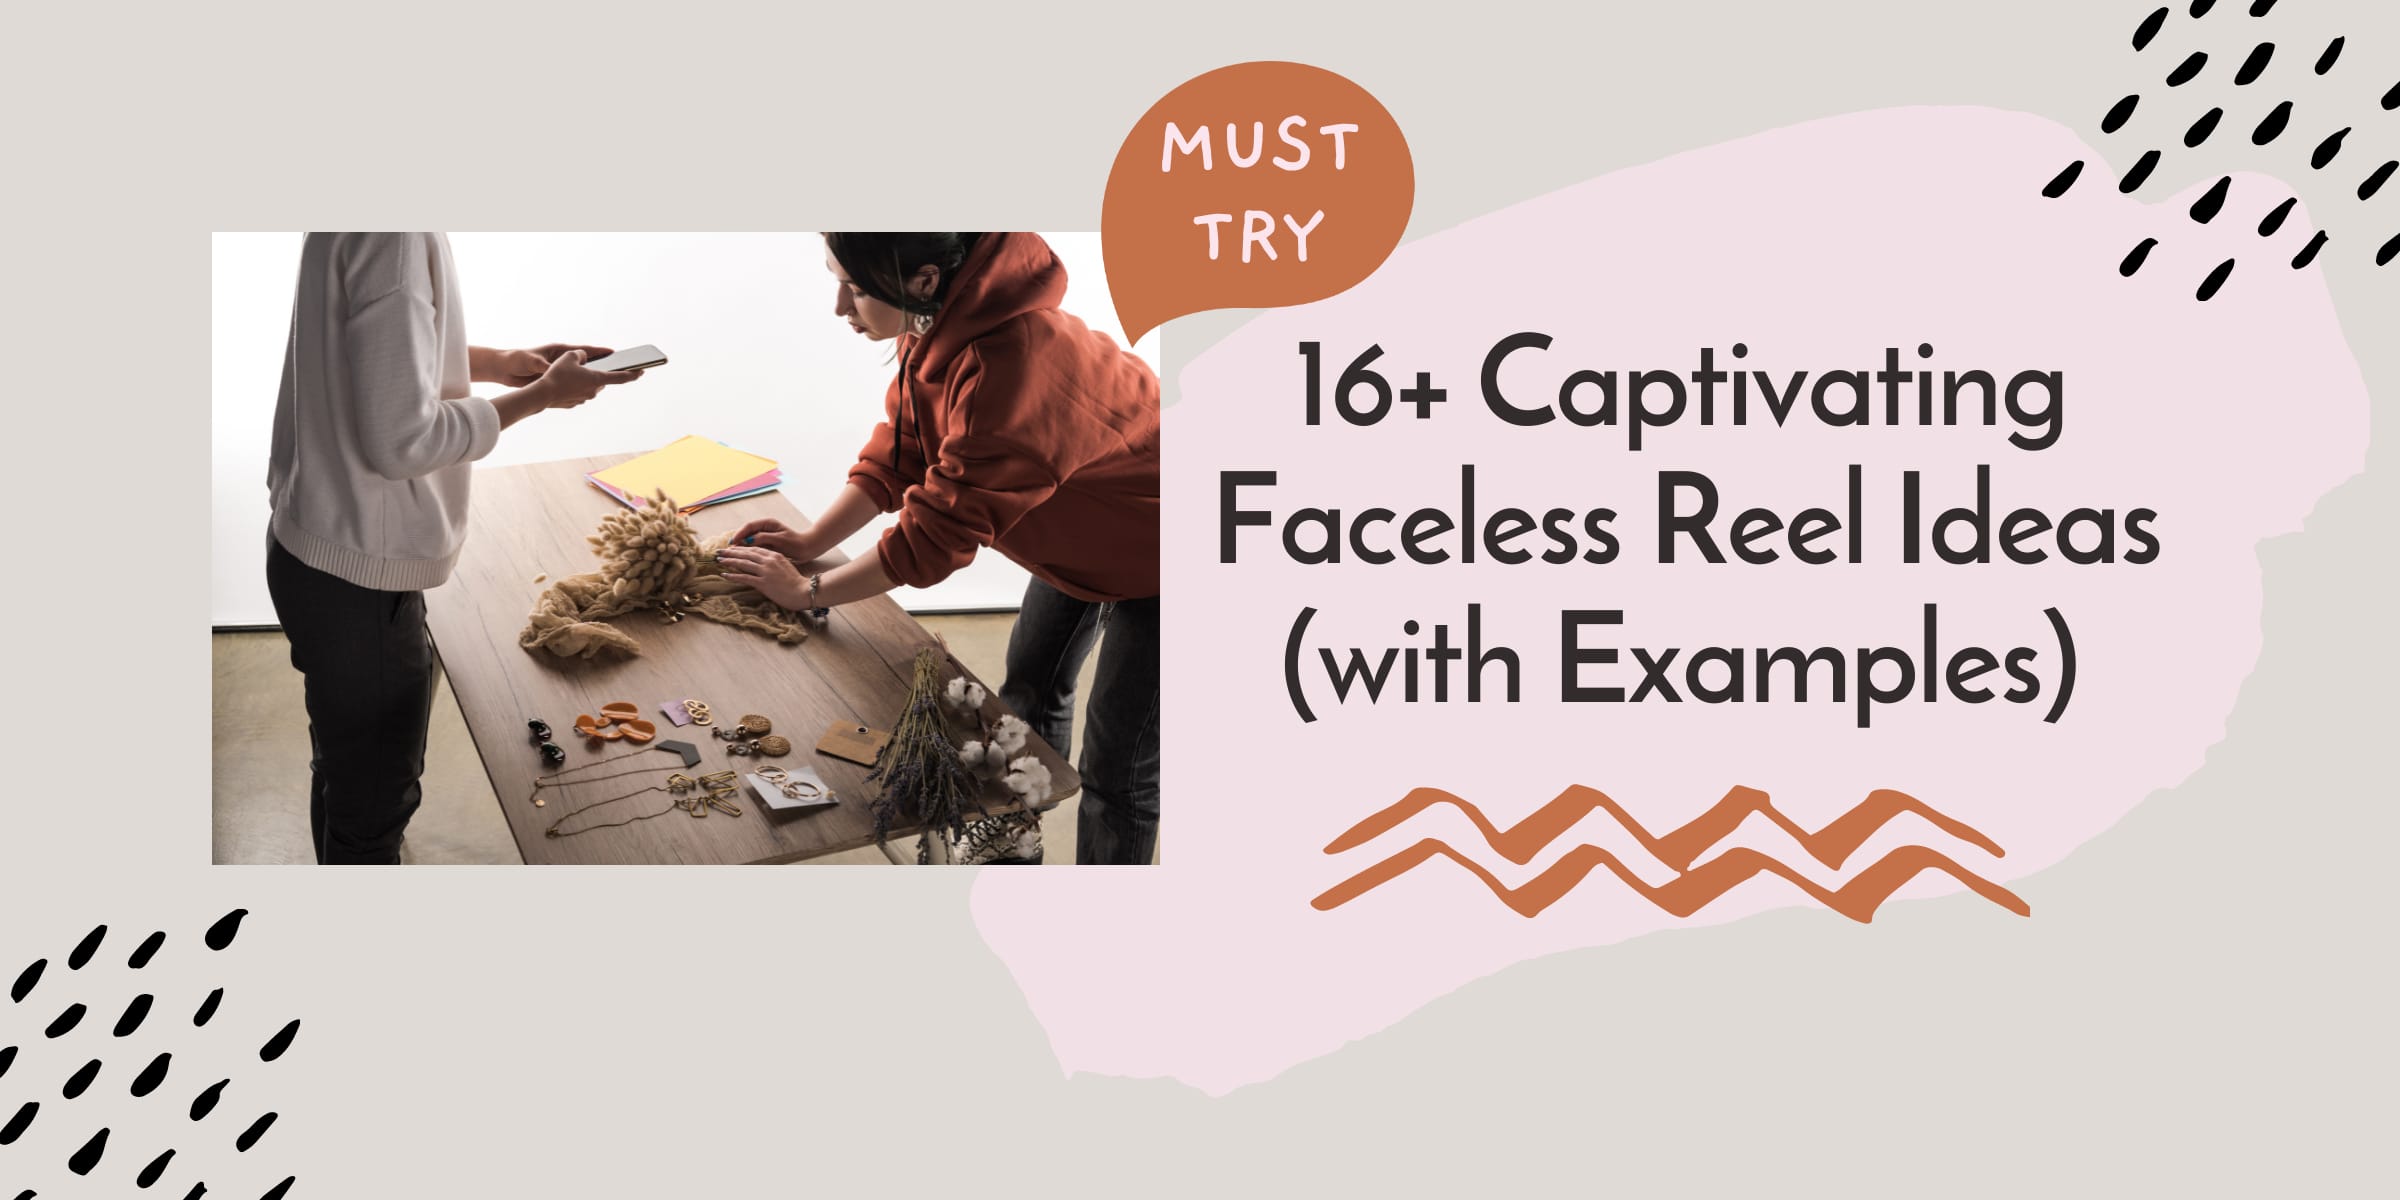 MUST TRY: 16+ Captivating Faceless Reel Ideas (with Examples